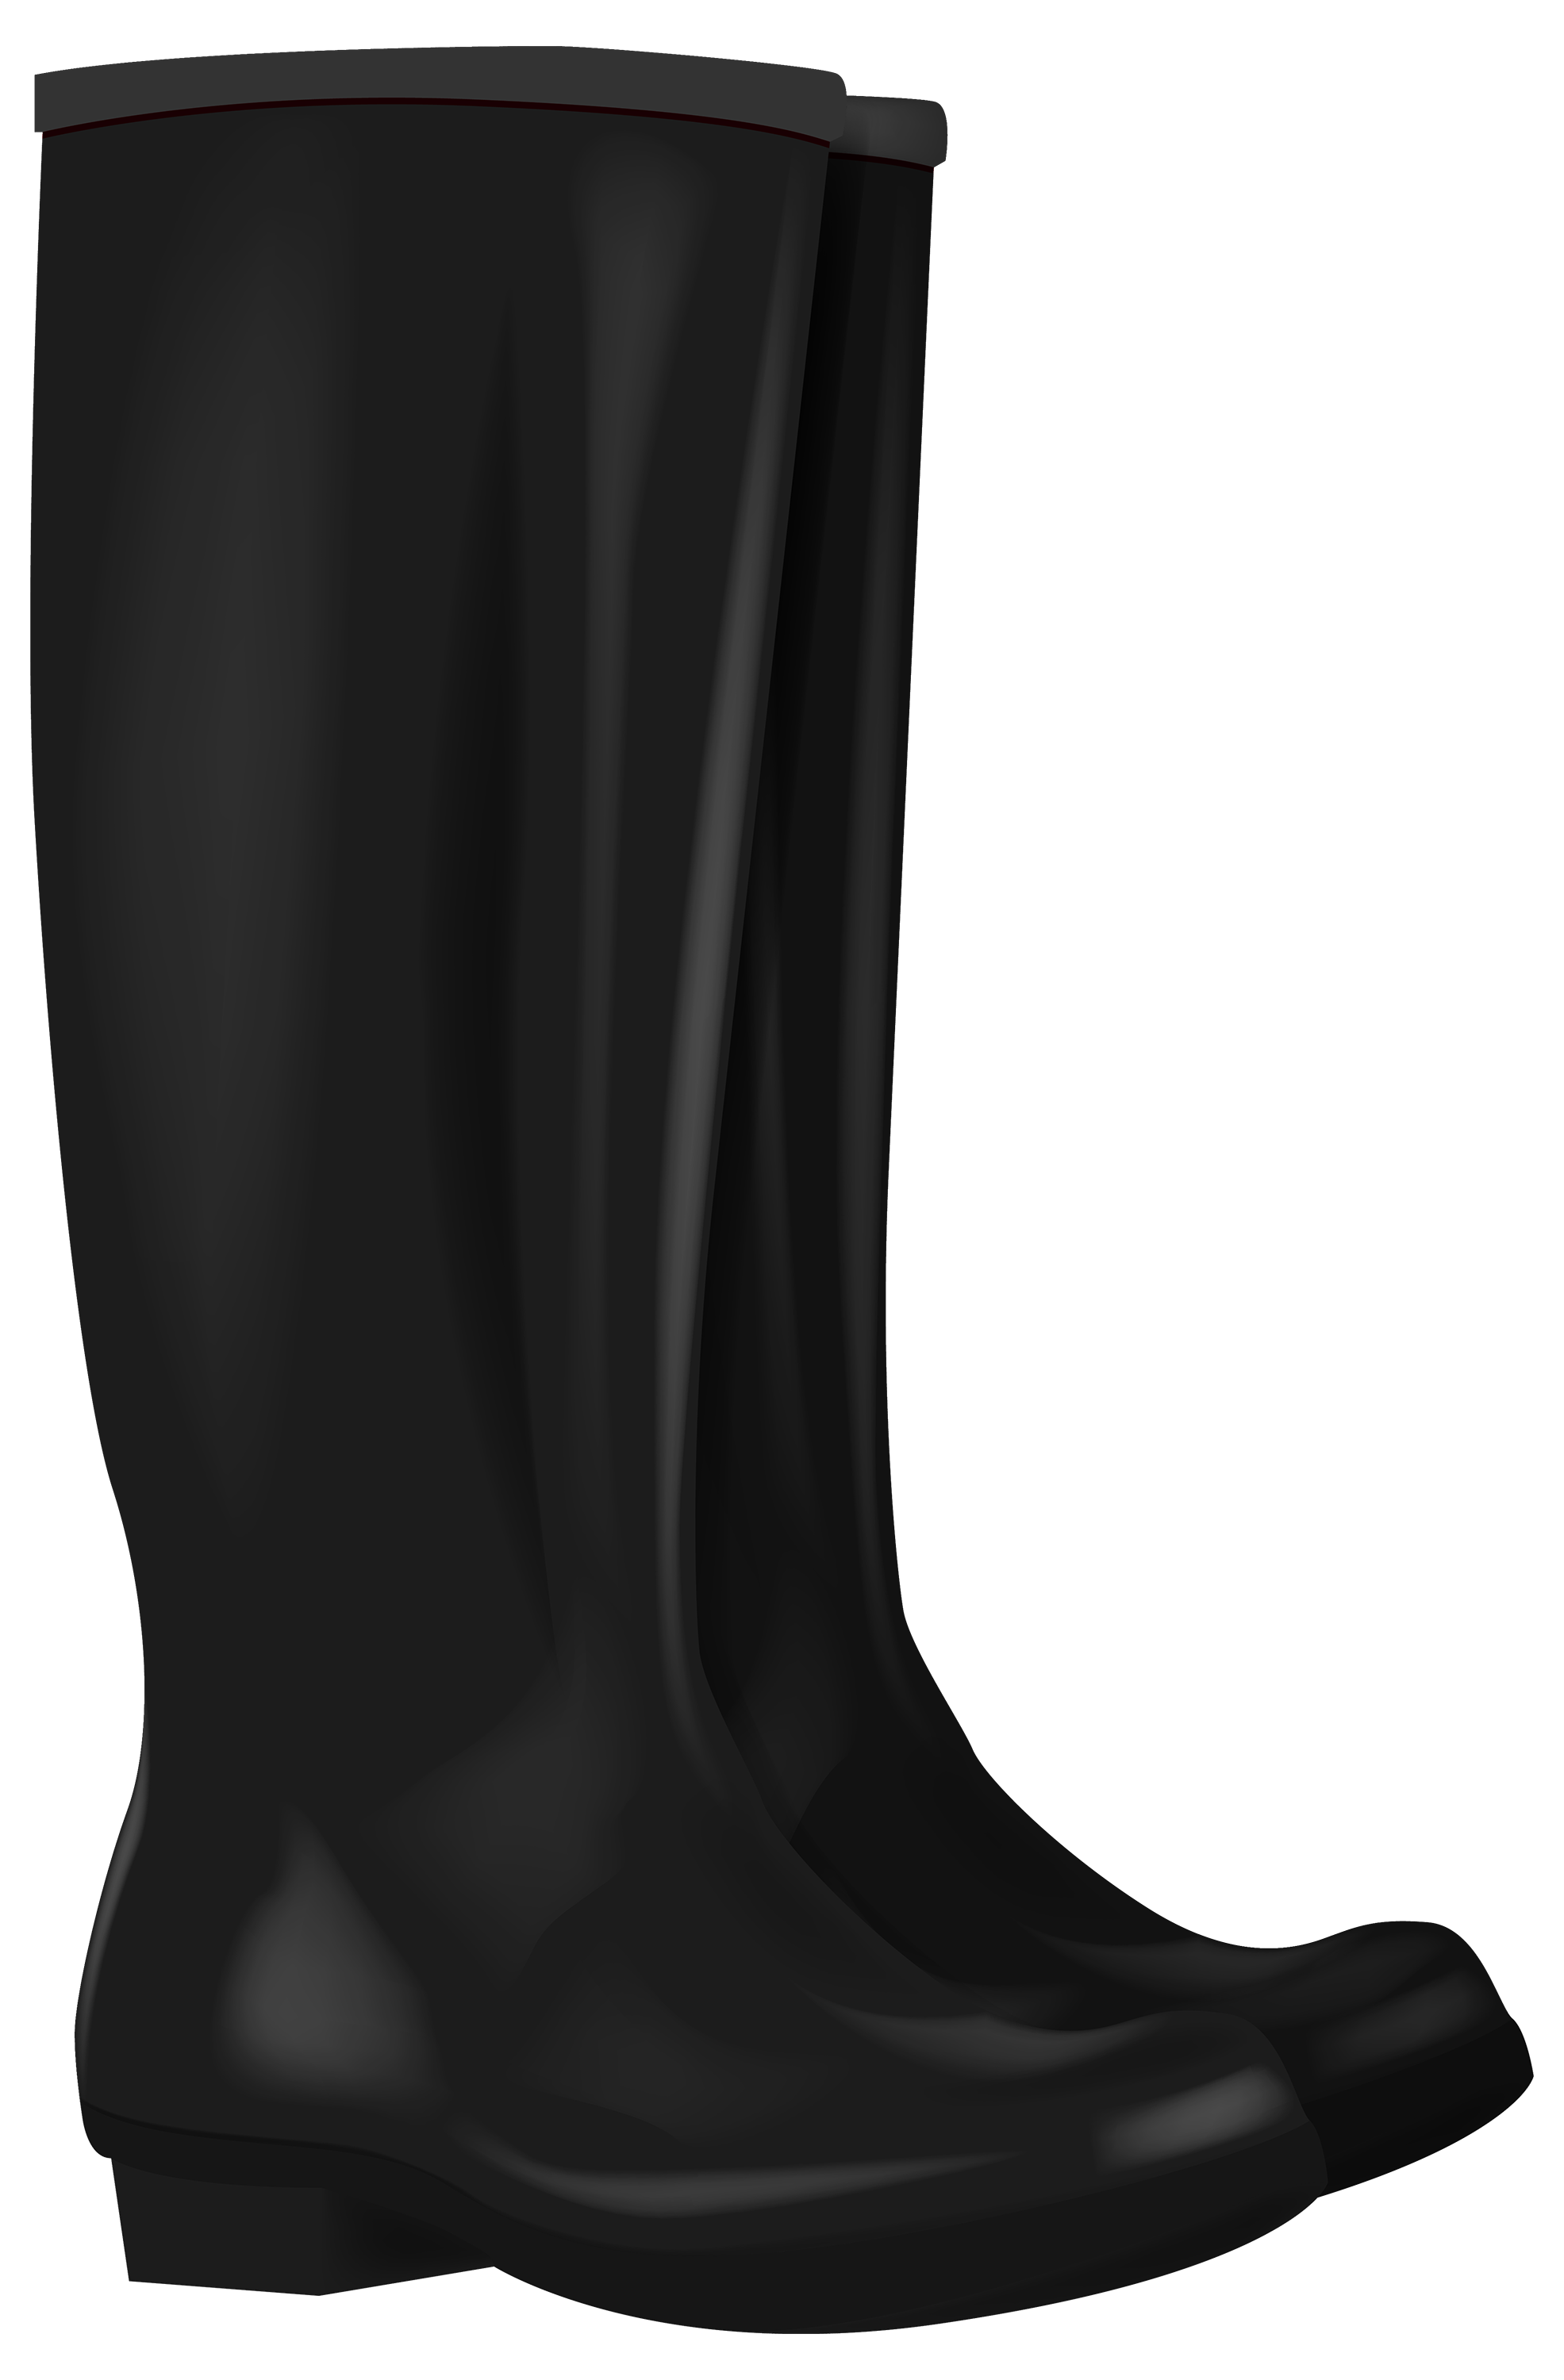 Black boots png best. Boot clipart rubber boot